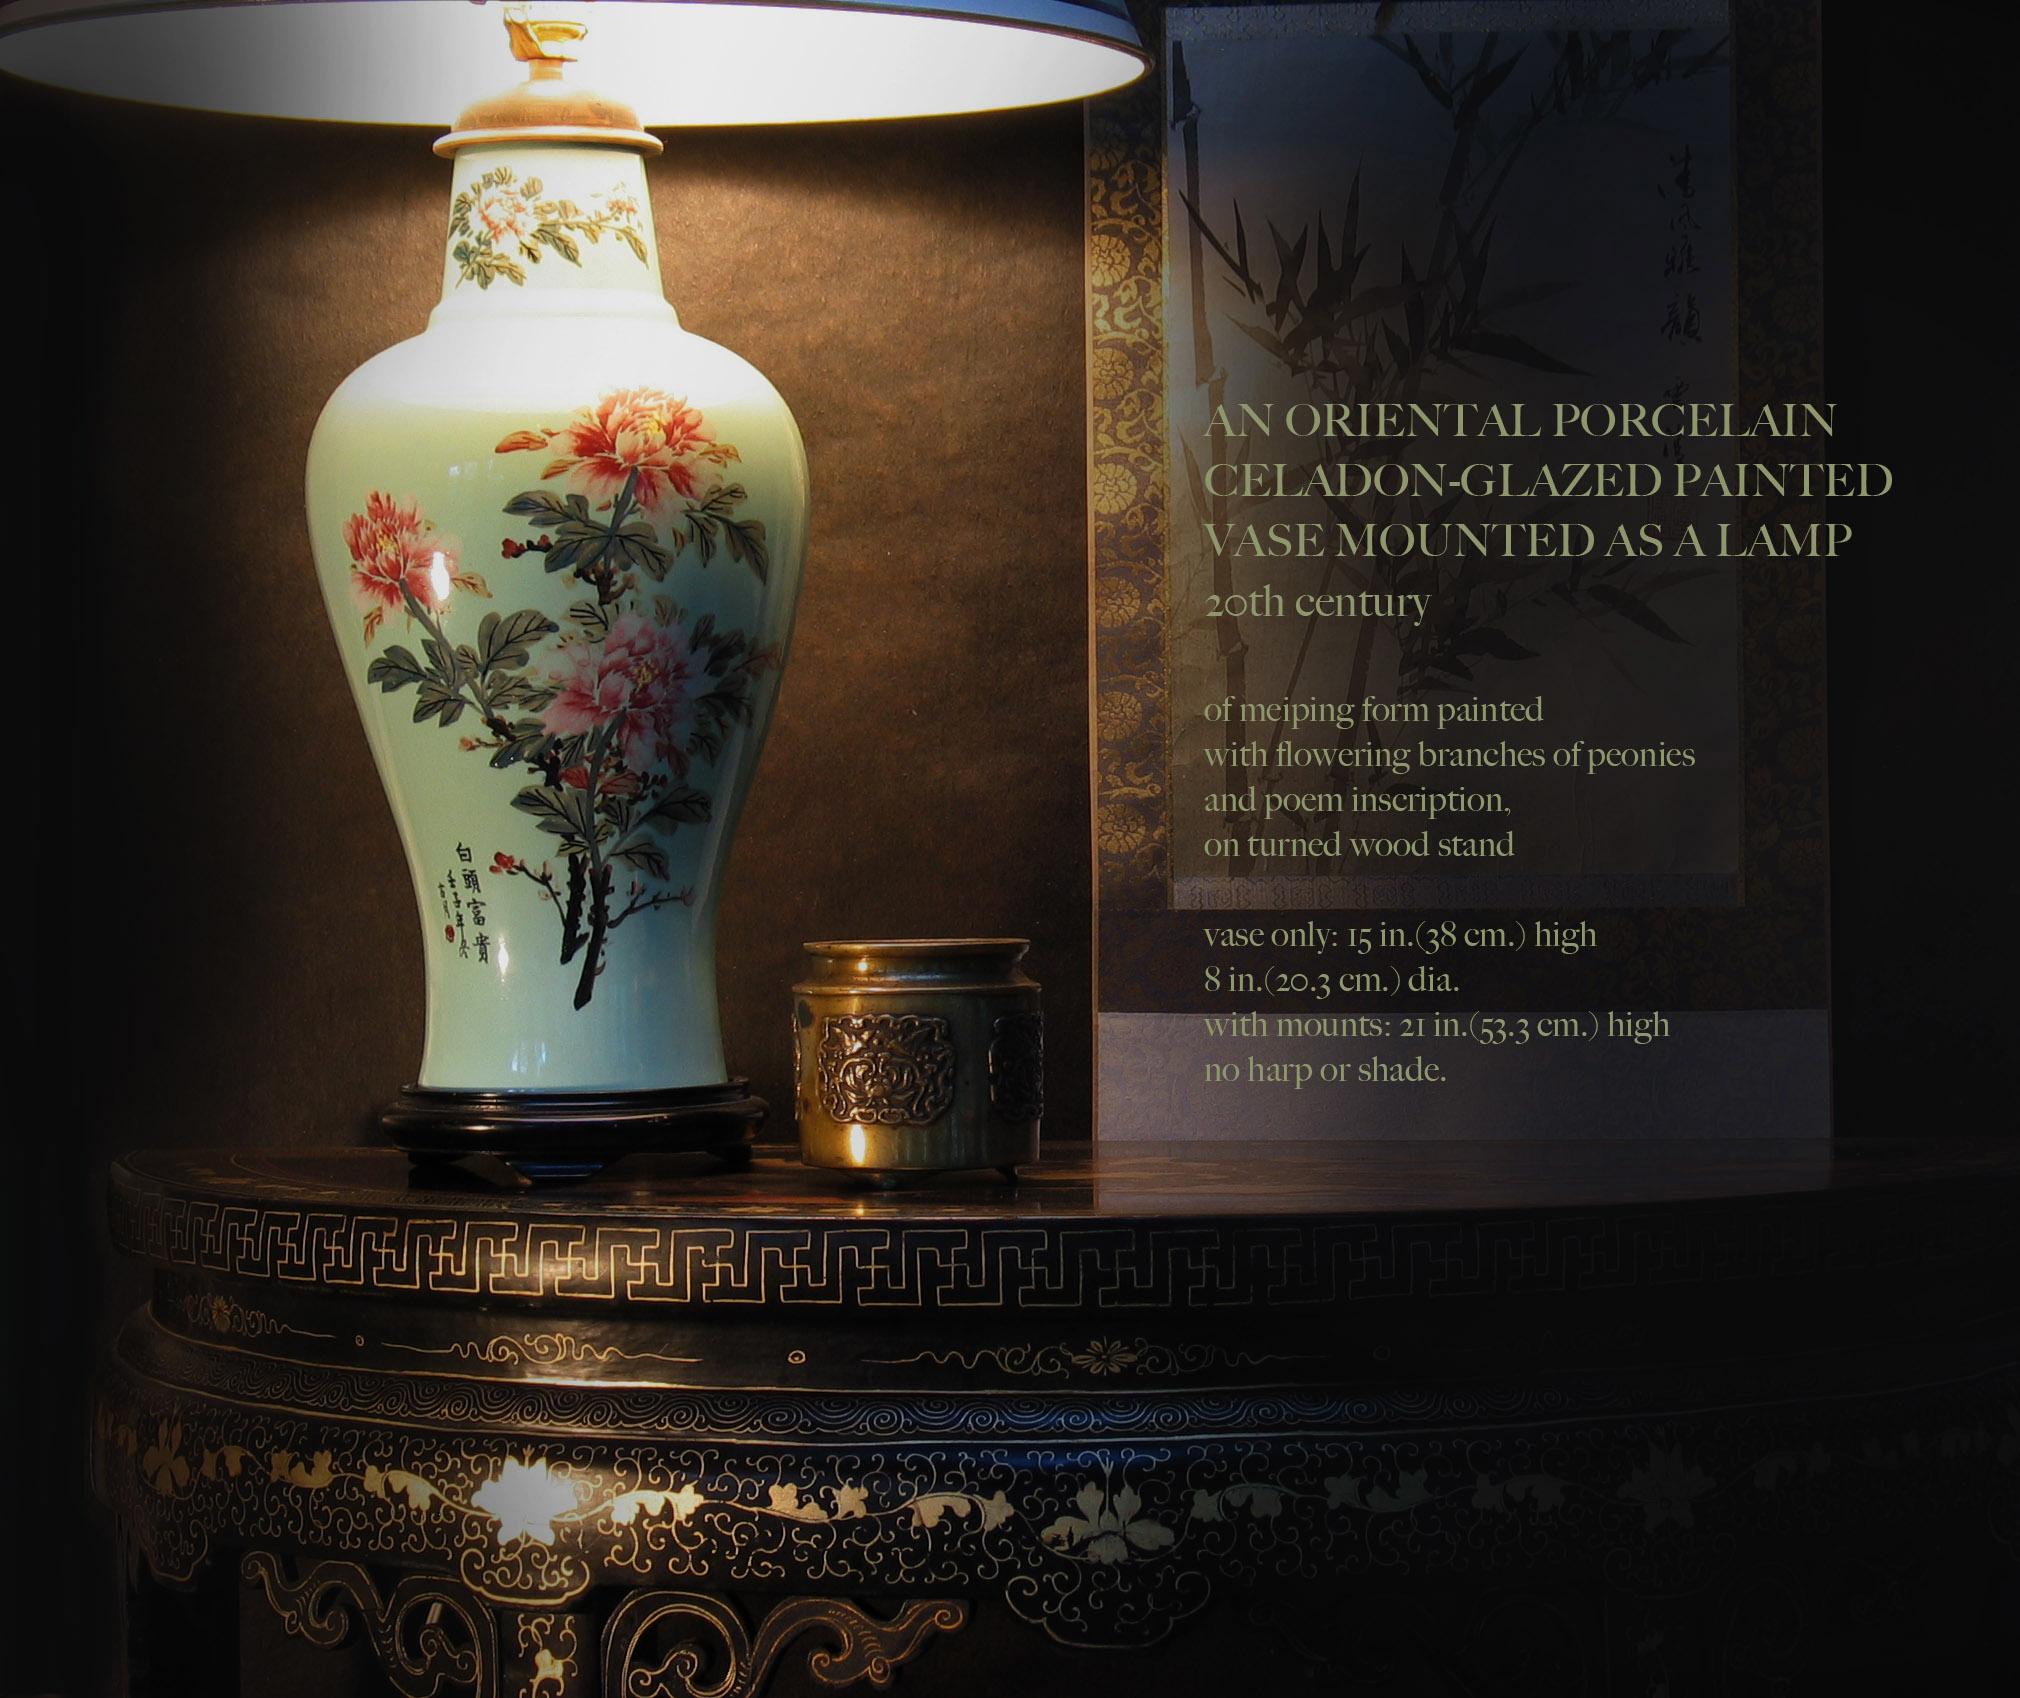 An oriental porcelain
Celadon-Glazed painted
Vase mounted as a lamp
20th century.

Of meiping form painted
with flowering branches of peonies
and poem inscription,
on turned wood stand.

Measures: vase only: 15 in.(38 cm.) high.
8